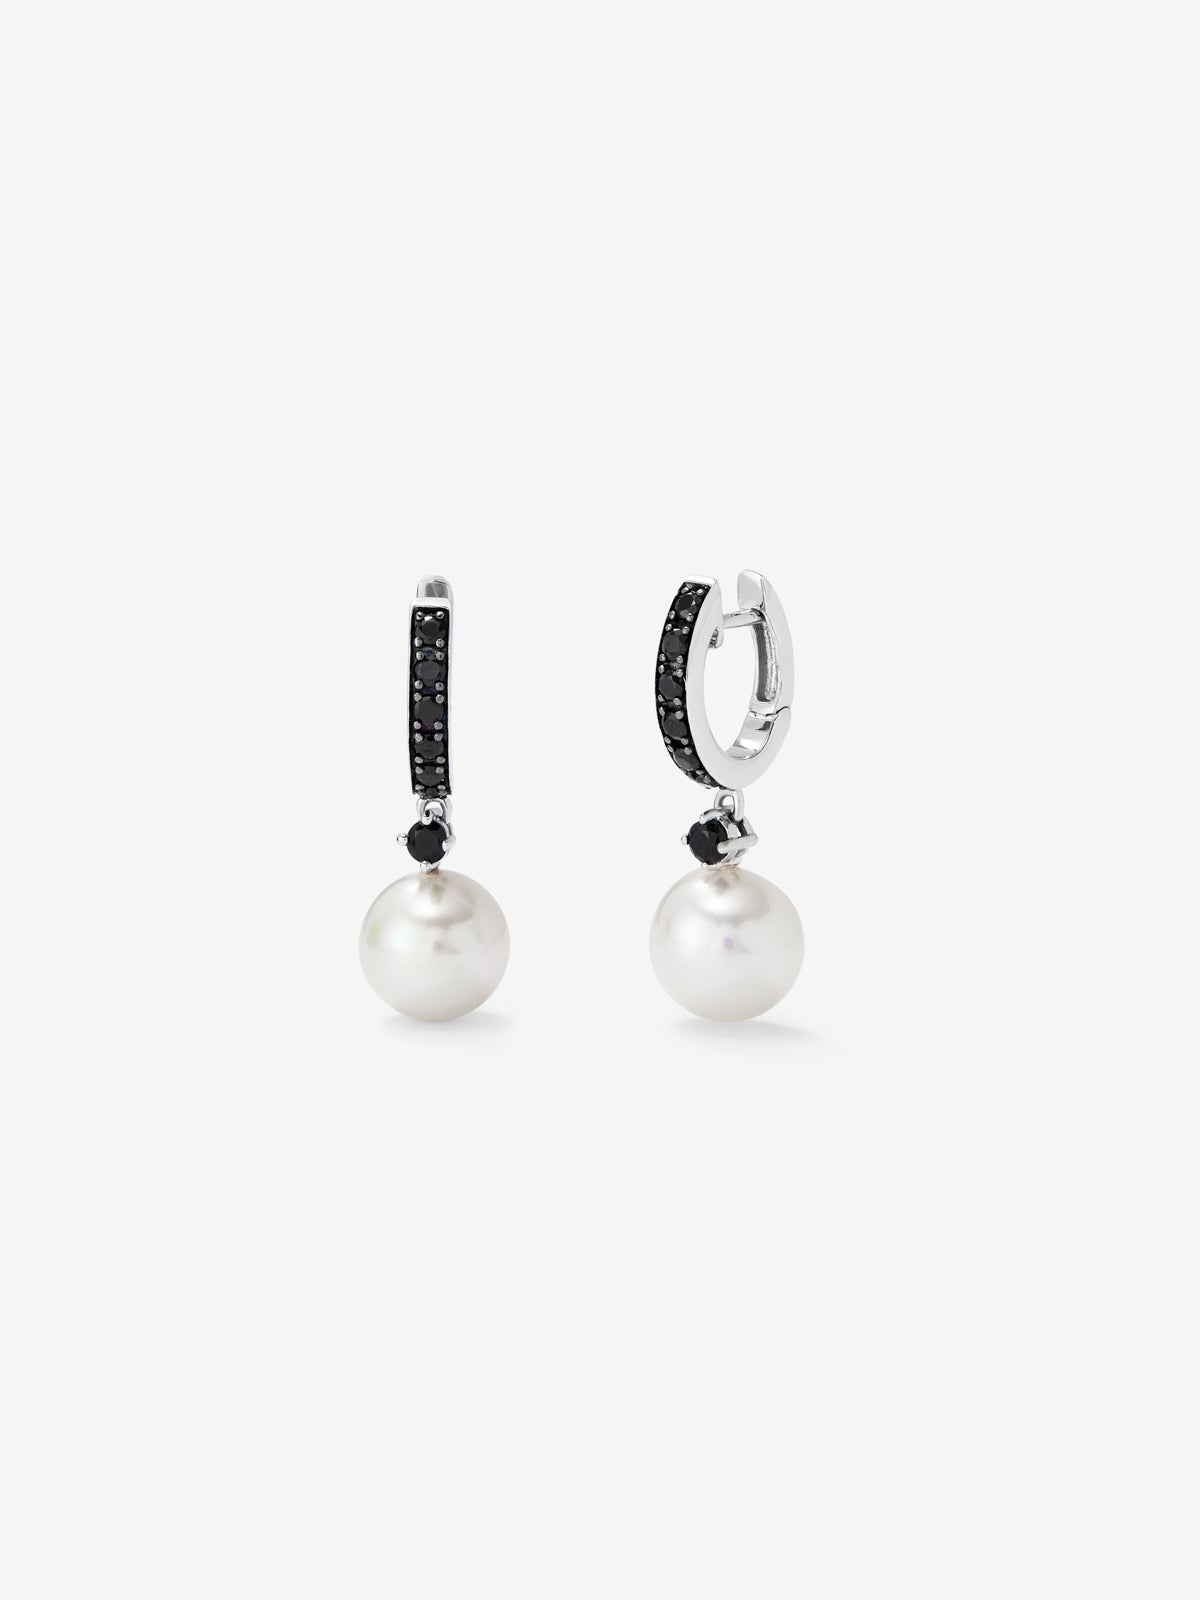 925 Silver hoop earring combined with 8.5 mm Akoya pearl and spinel.